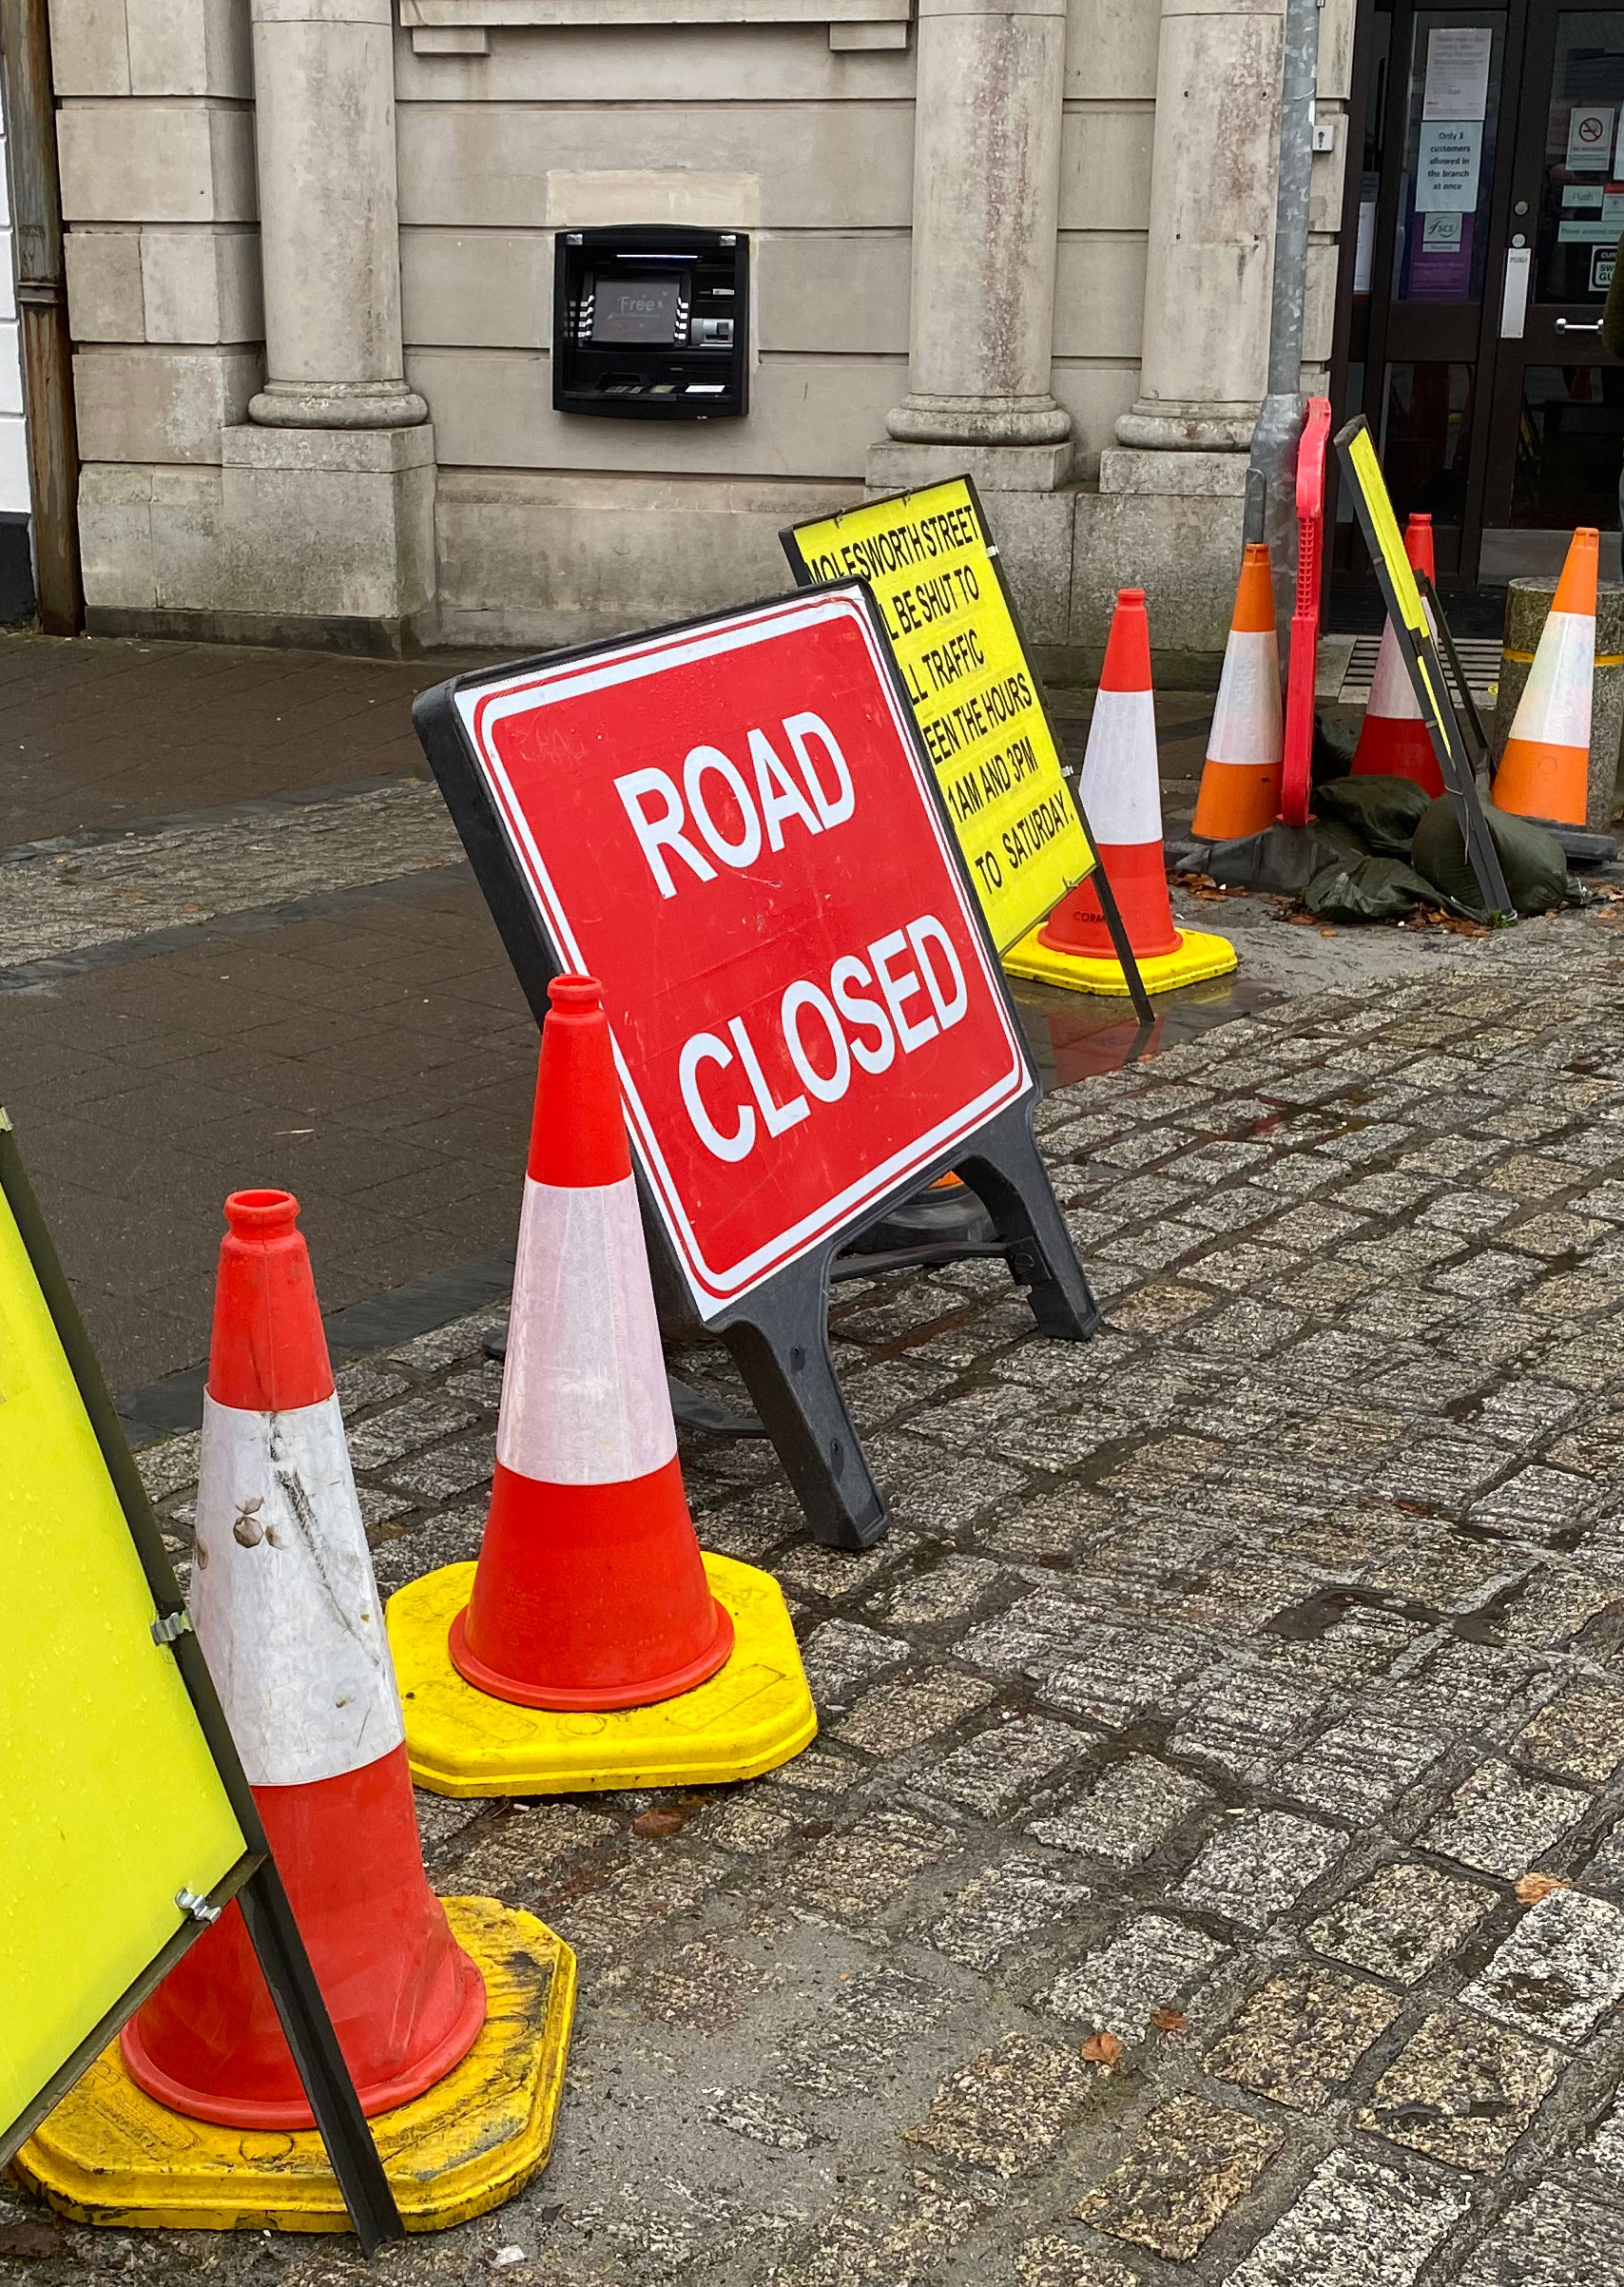 Main sewer connections may require road closures but ASL Limited is fully authorised to do so.